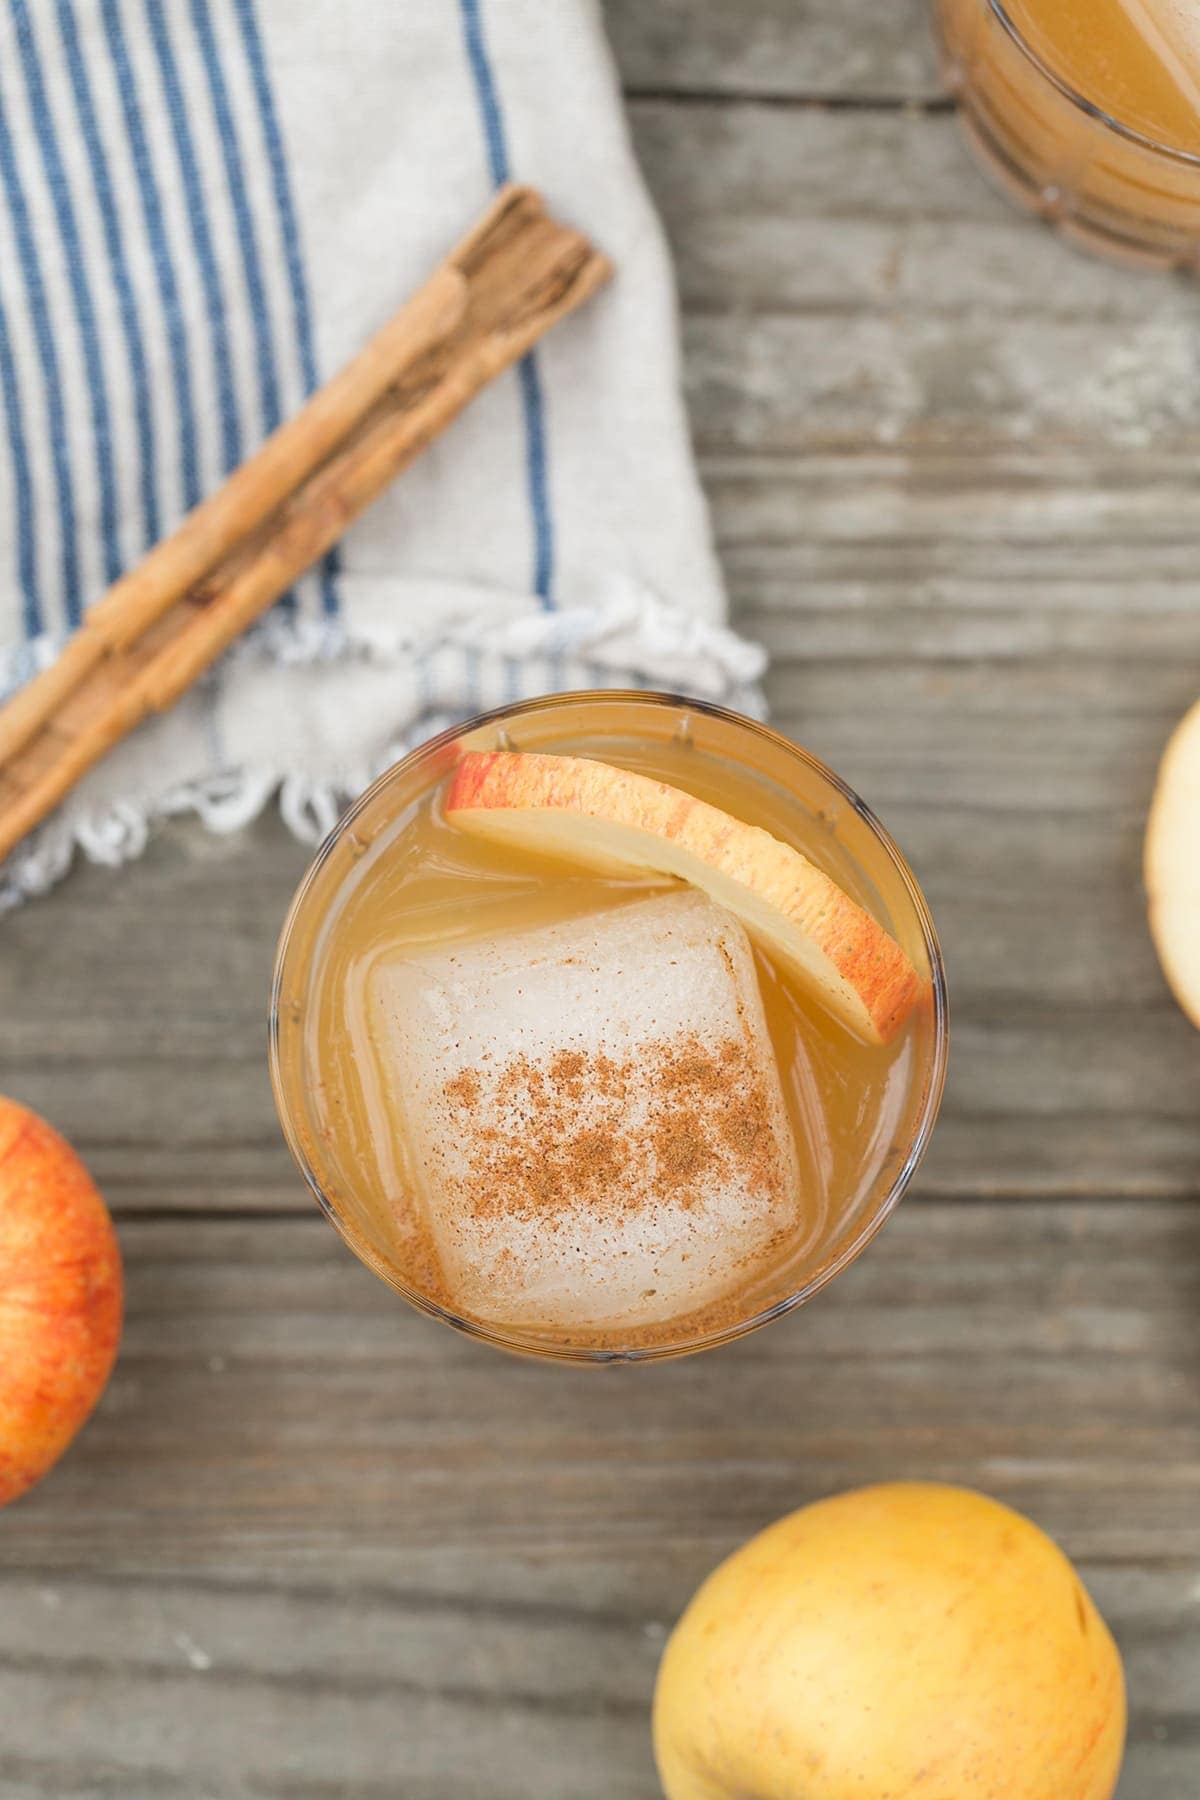 Apples and Tequila Cocktail